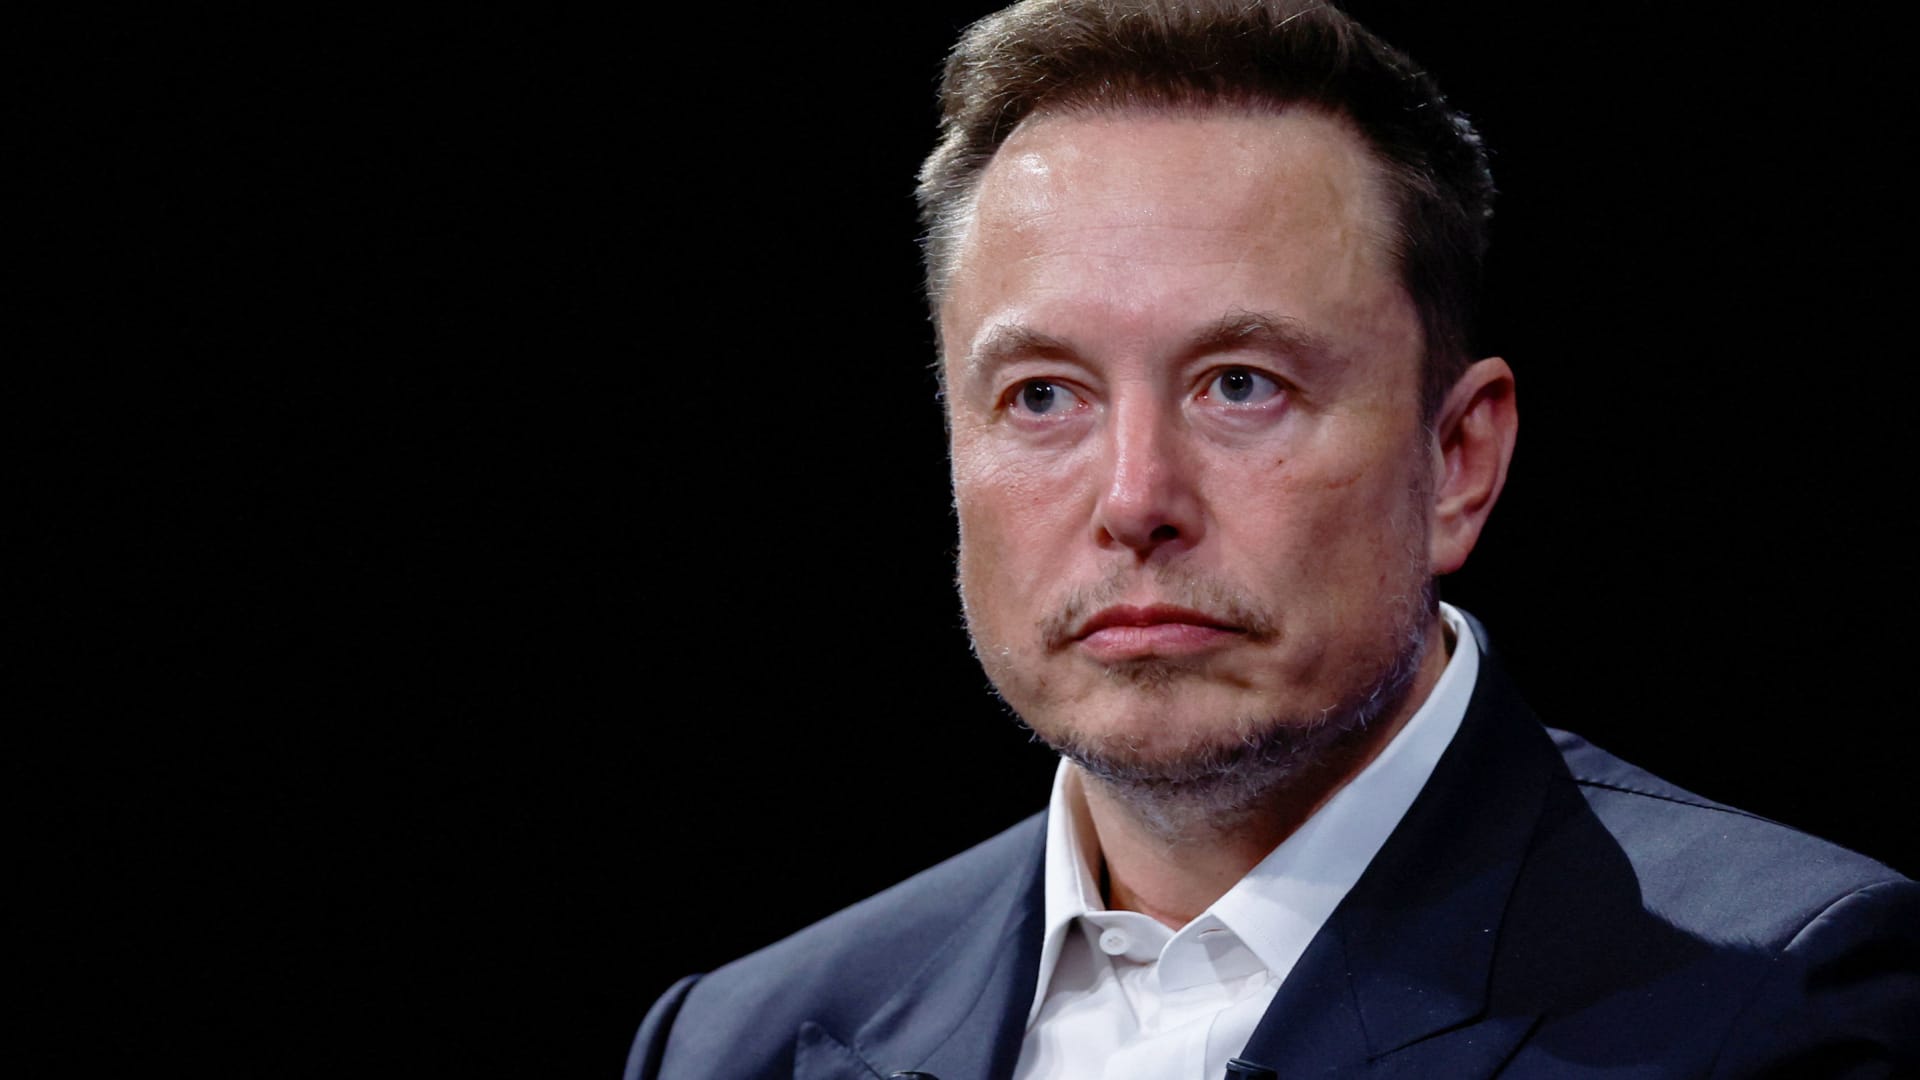 Elon Musk biographer strikes to ‘elaborate’ small print about Ukraine and Starlink after backlash